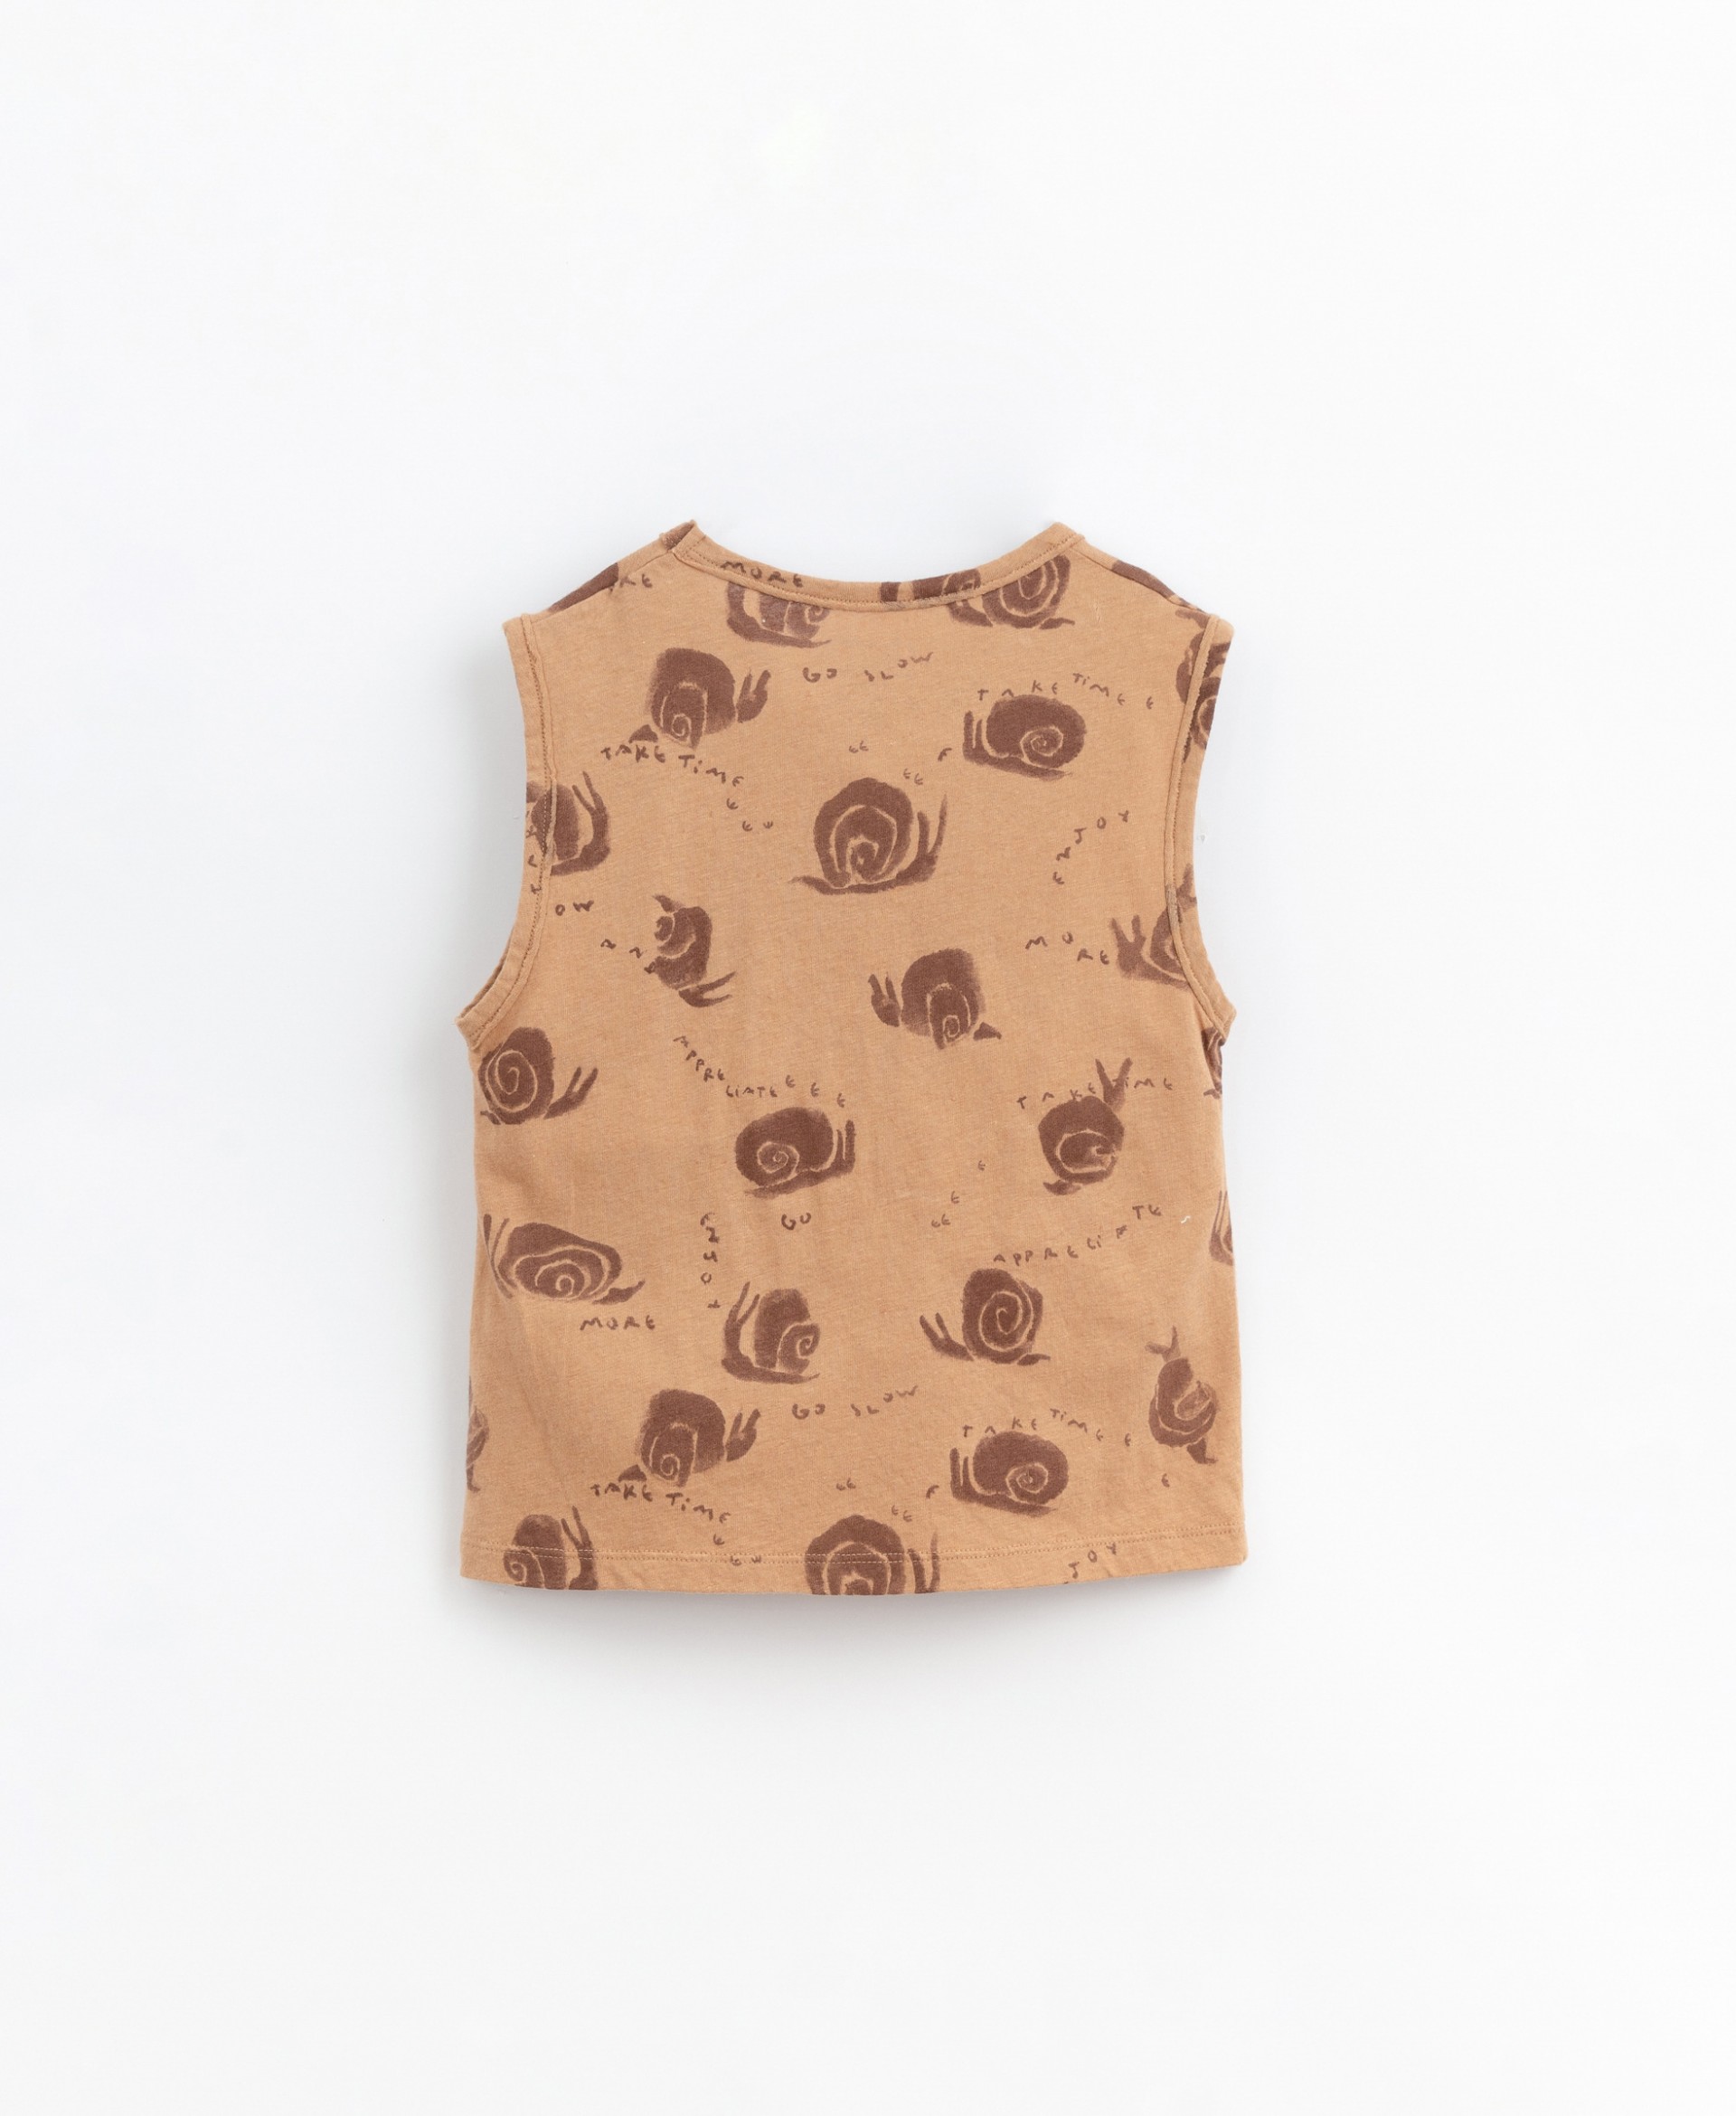 Sleeve-less t-shirt with snail print | Basketry